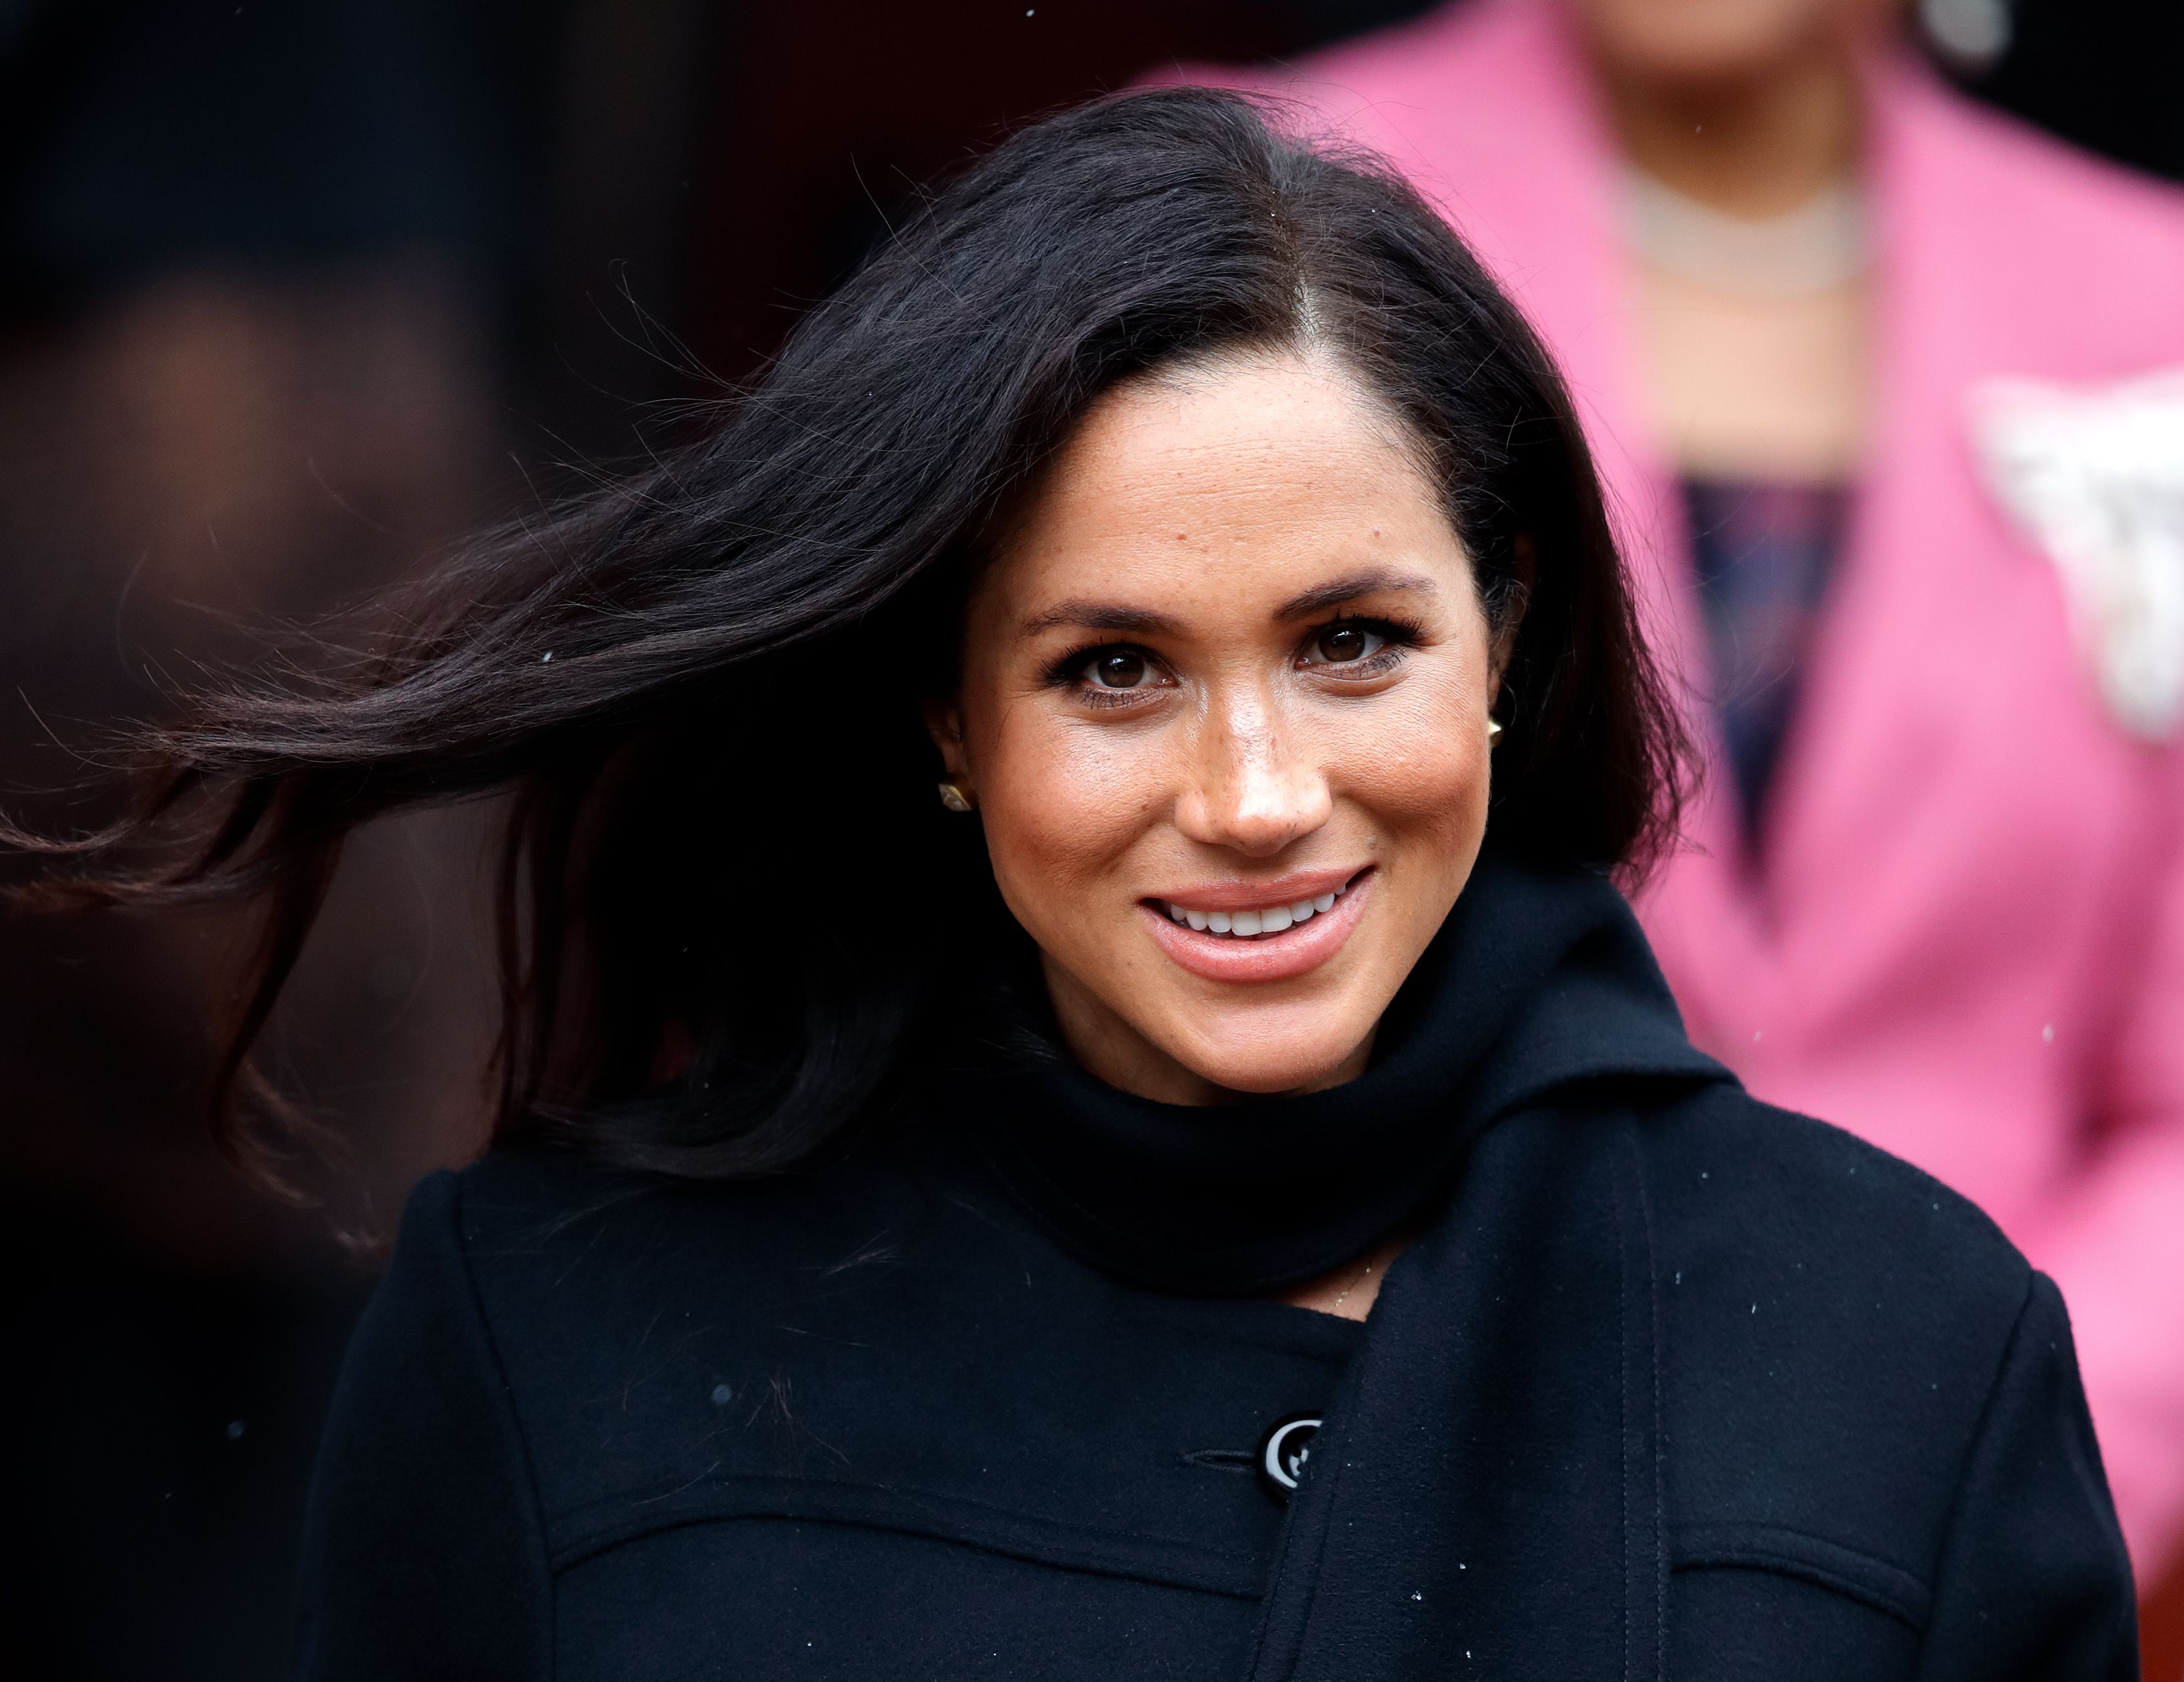 Duchess Meghan Is Finding Immense "Support" in Her Two Rescue Dogs During the Pandemic